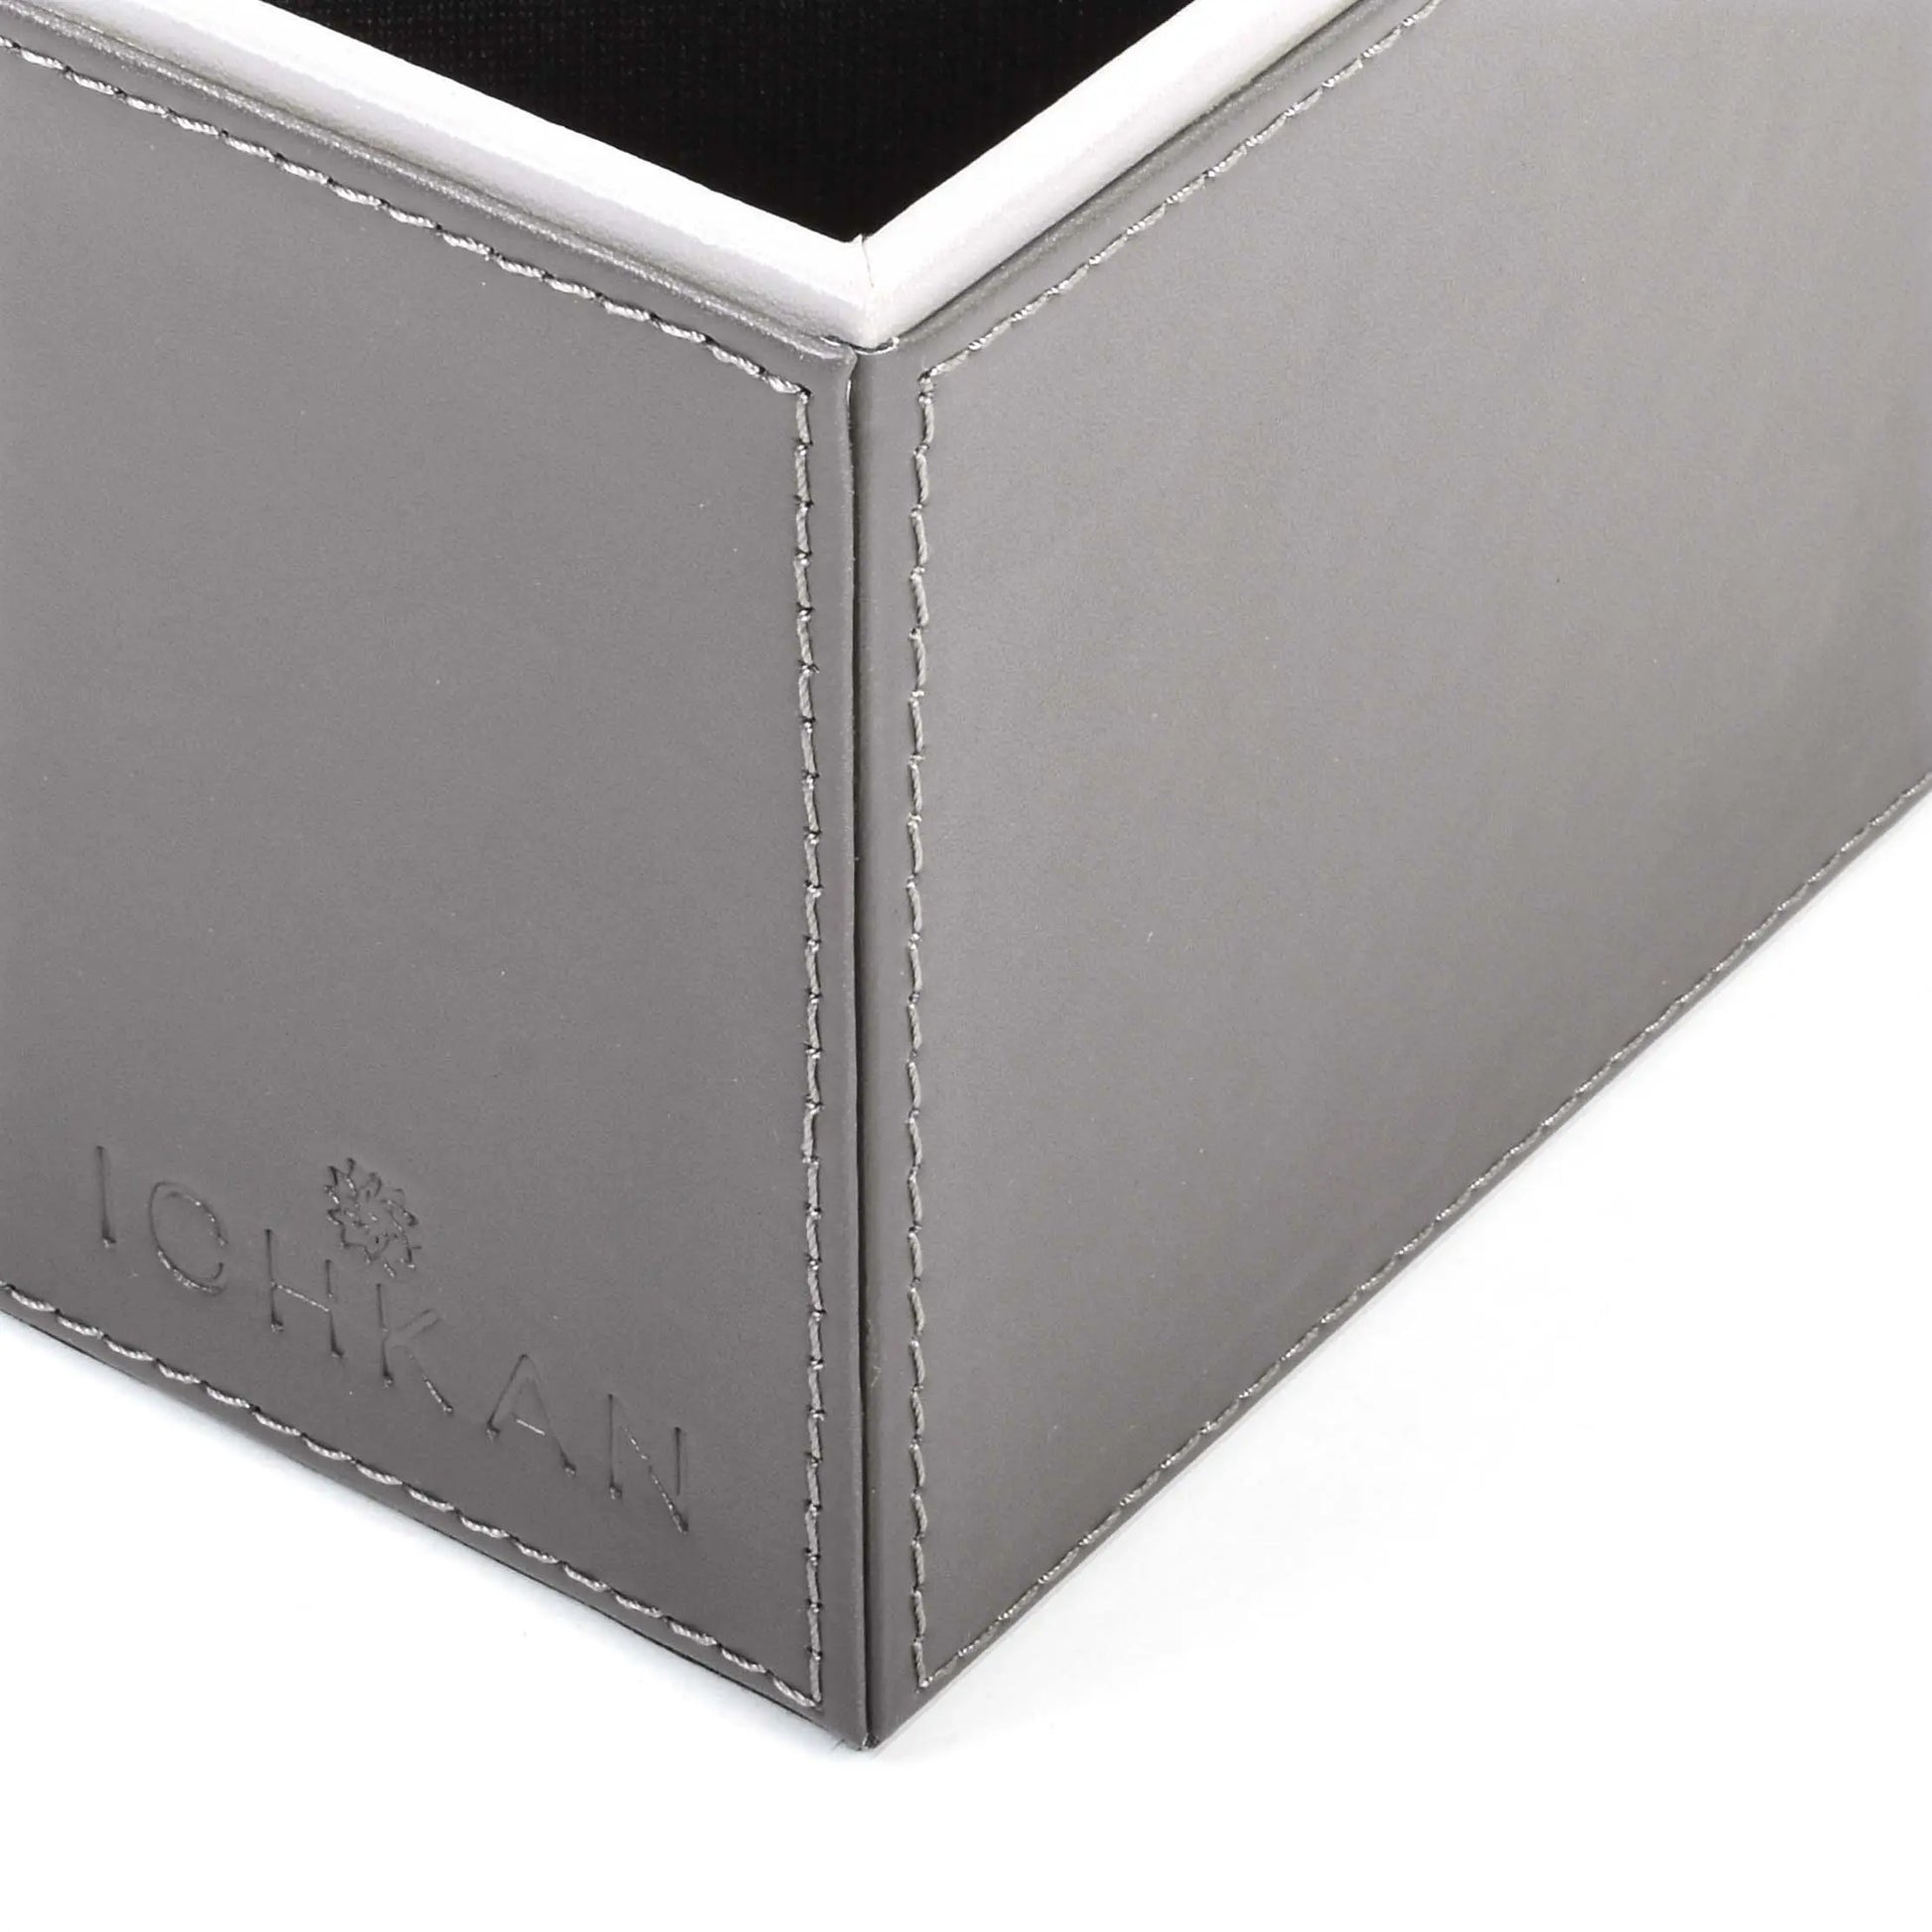 Leatherette Cosmetic/Pen Holder I Grey | Axis ICHKAN